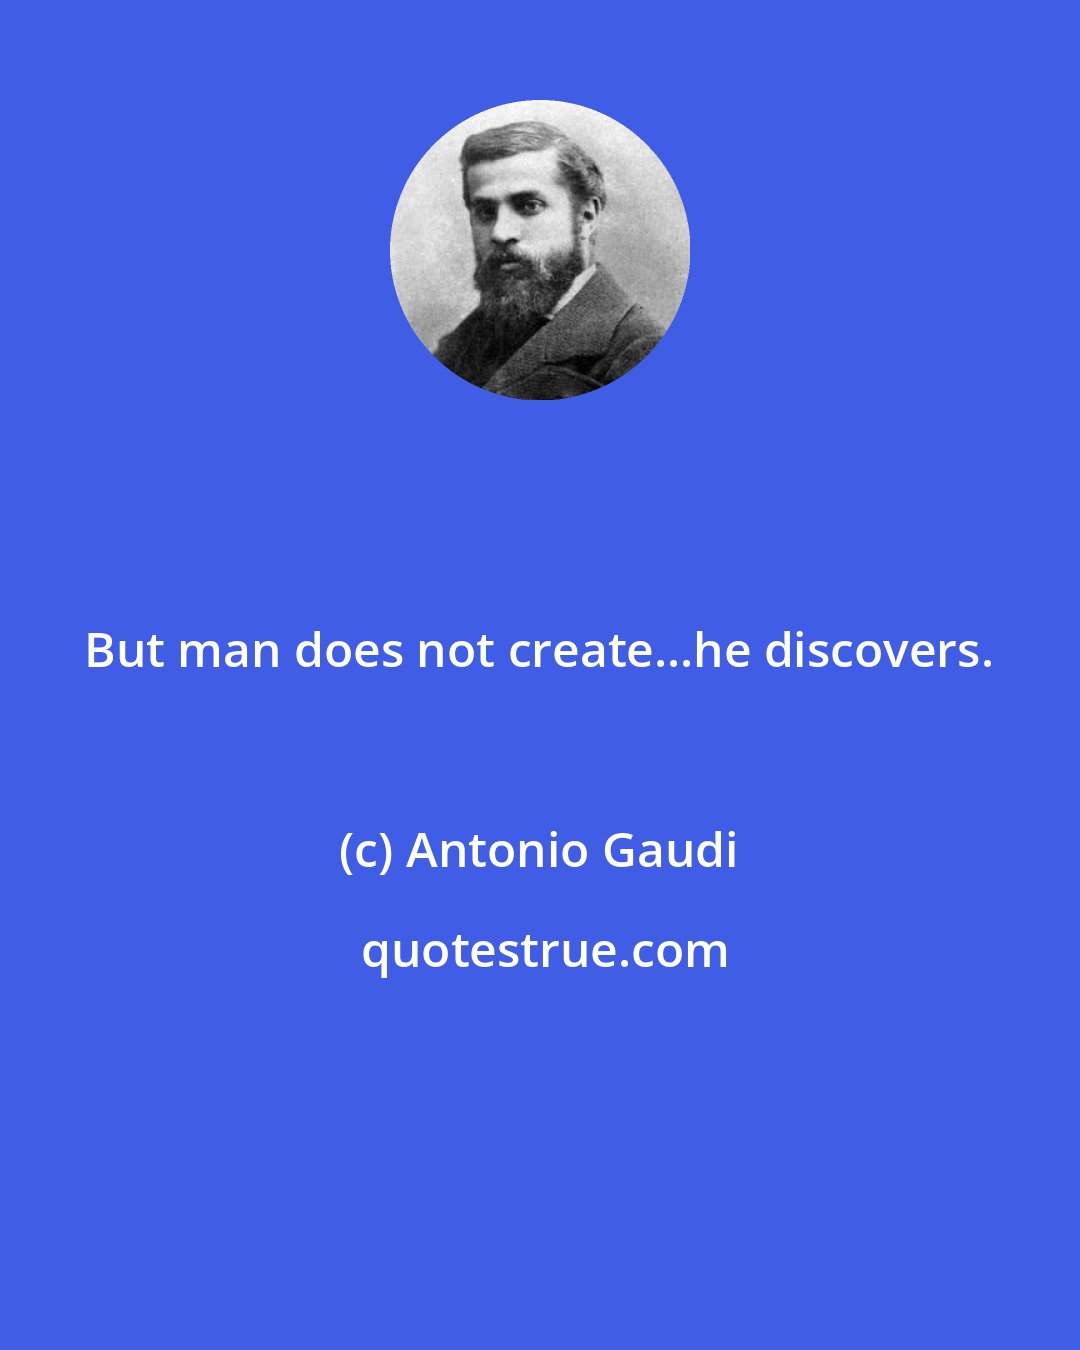 Antonio Gaudi: But man does not create...he discovers.